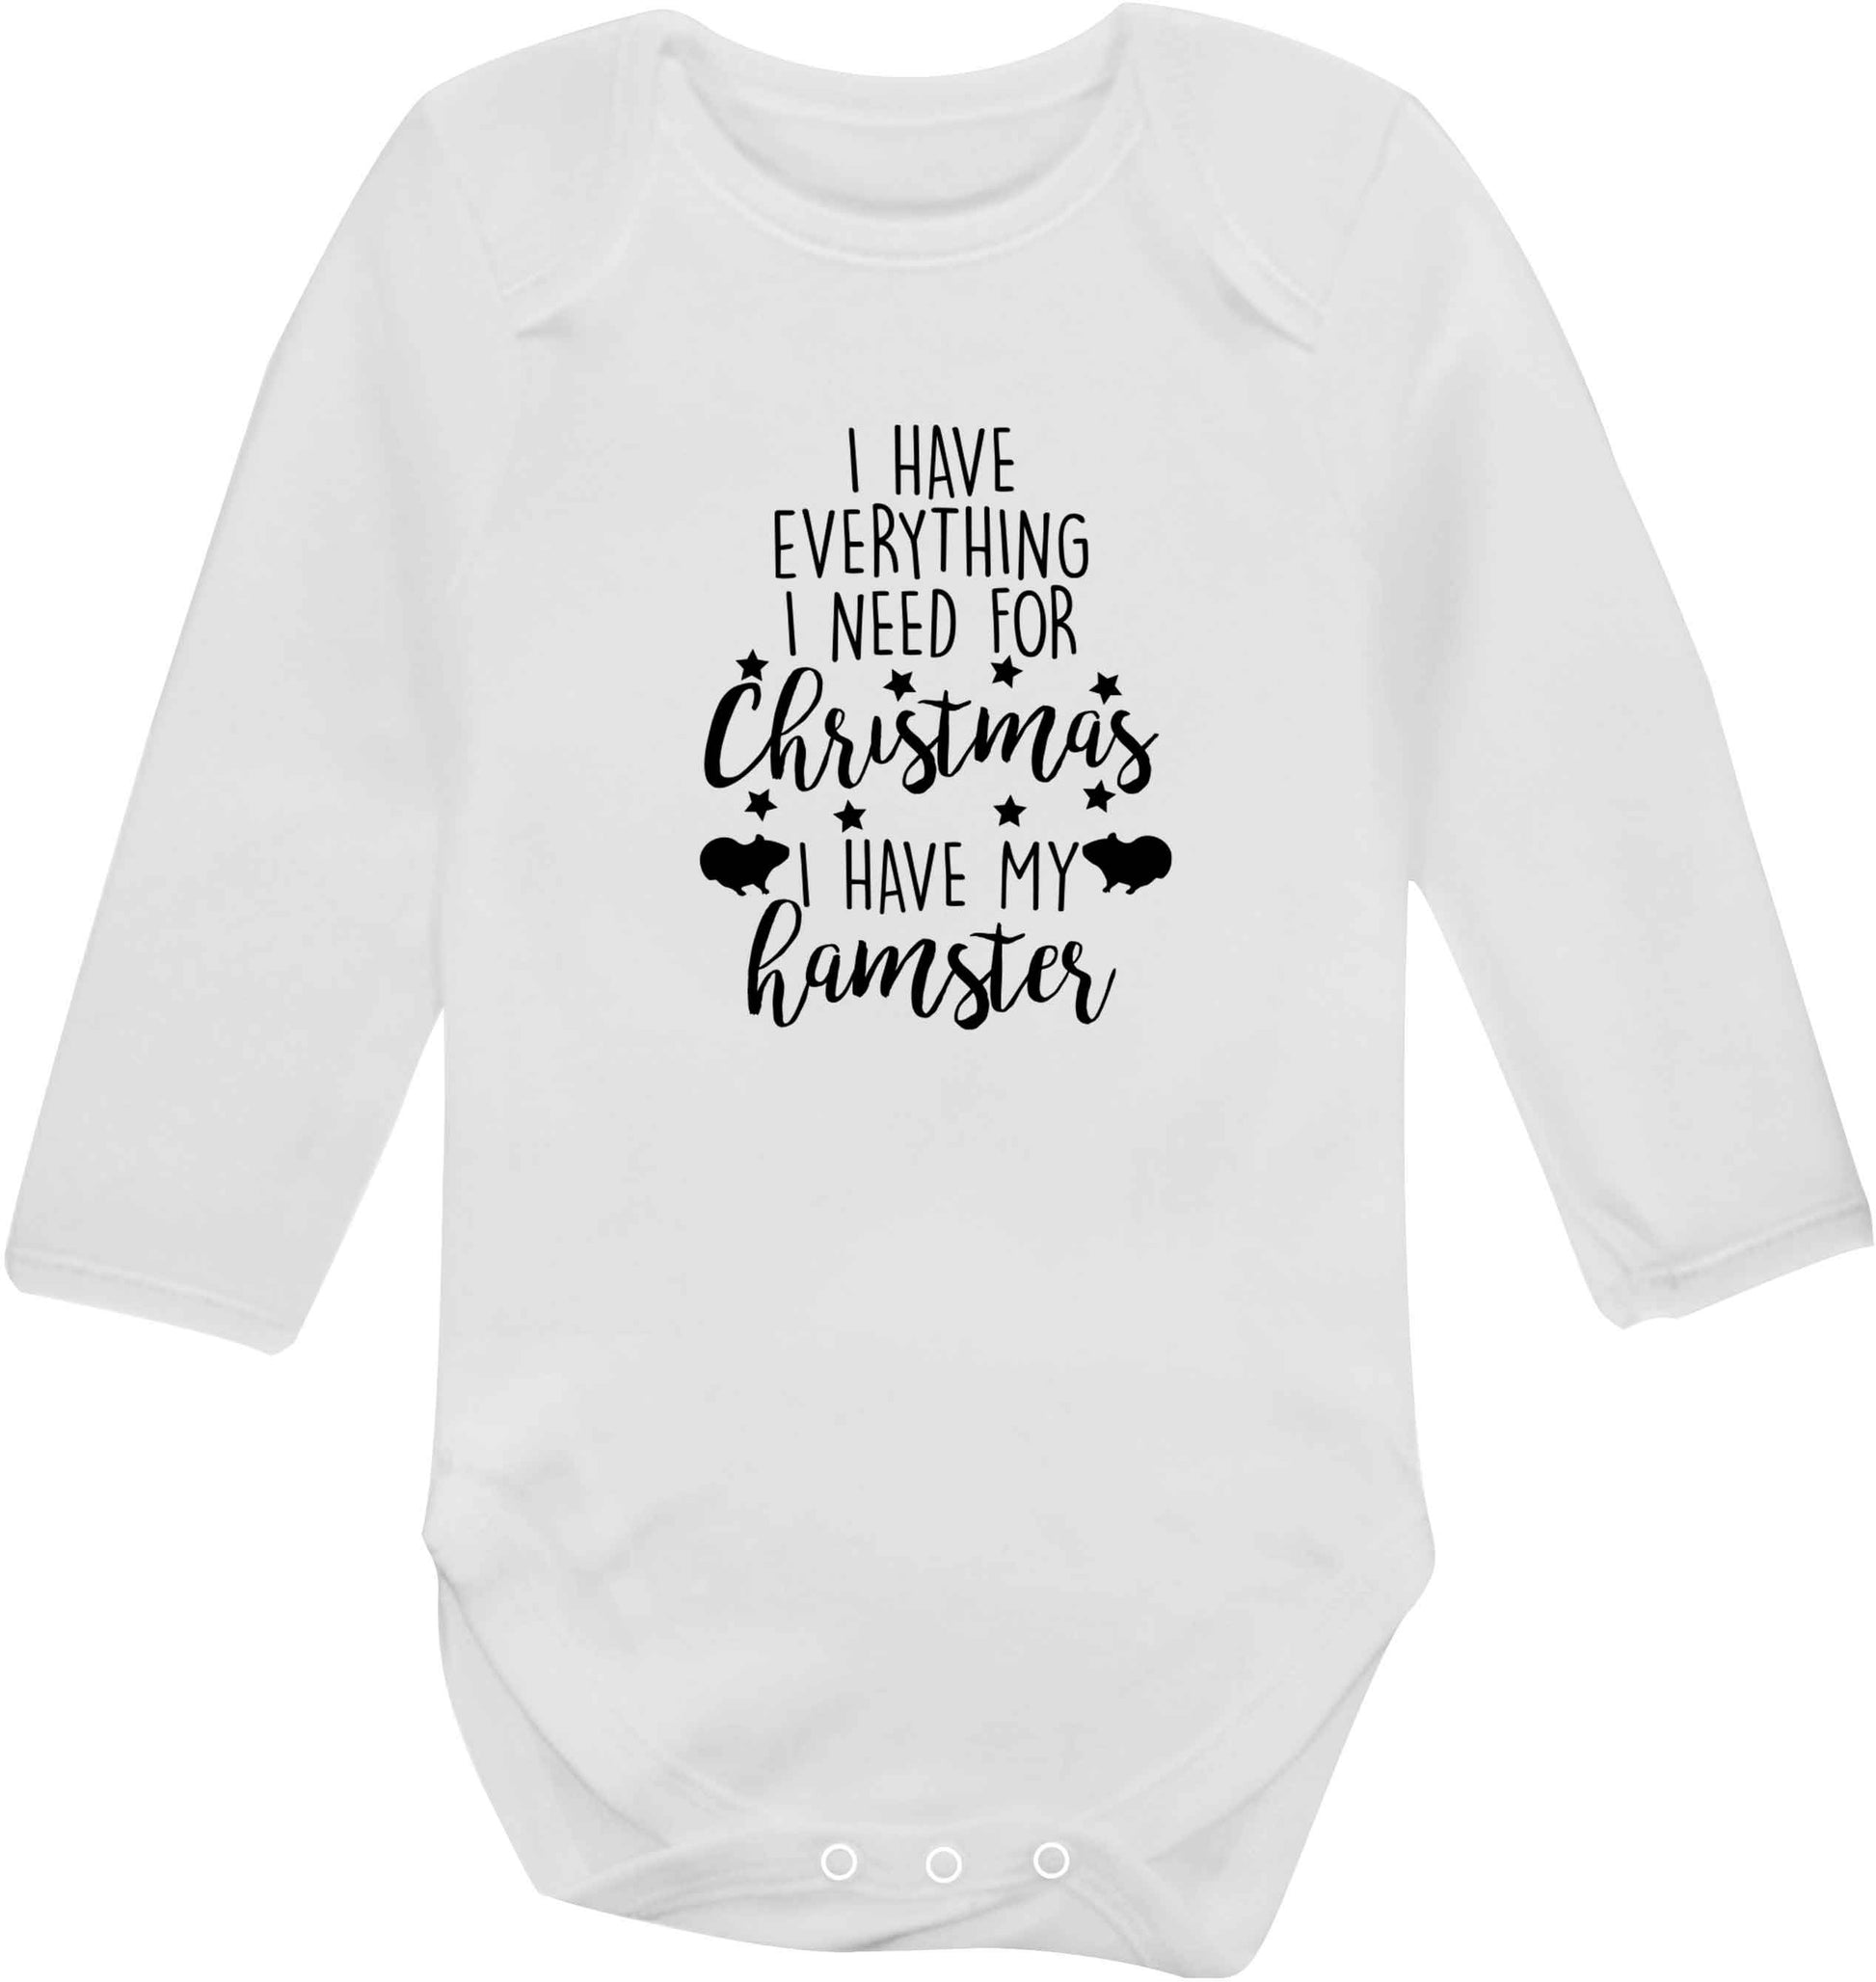 I have everything I need for Christmas I have my hamster baby vest long sleeved white 6-12 months